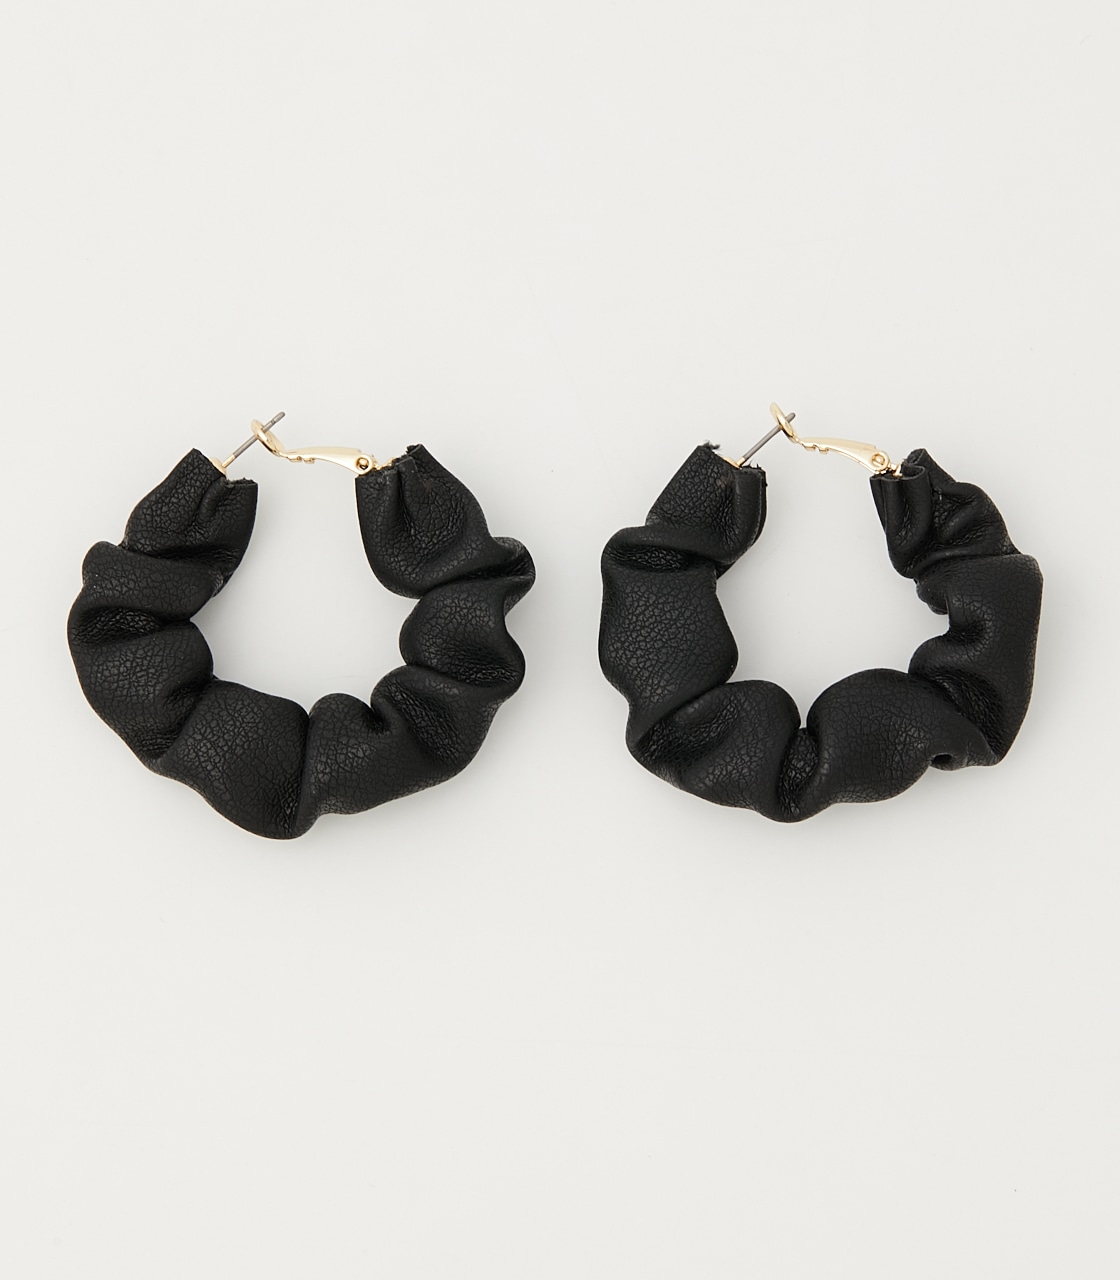 FAUX LEATHER GATHER EARRINGS/フェイクレザーギャザーピアス 詳細画像 BLK 1